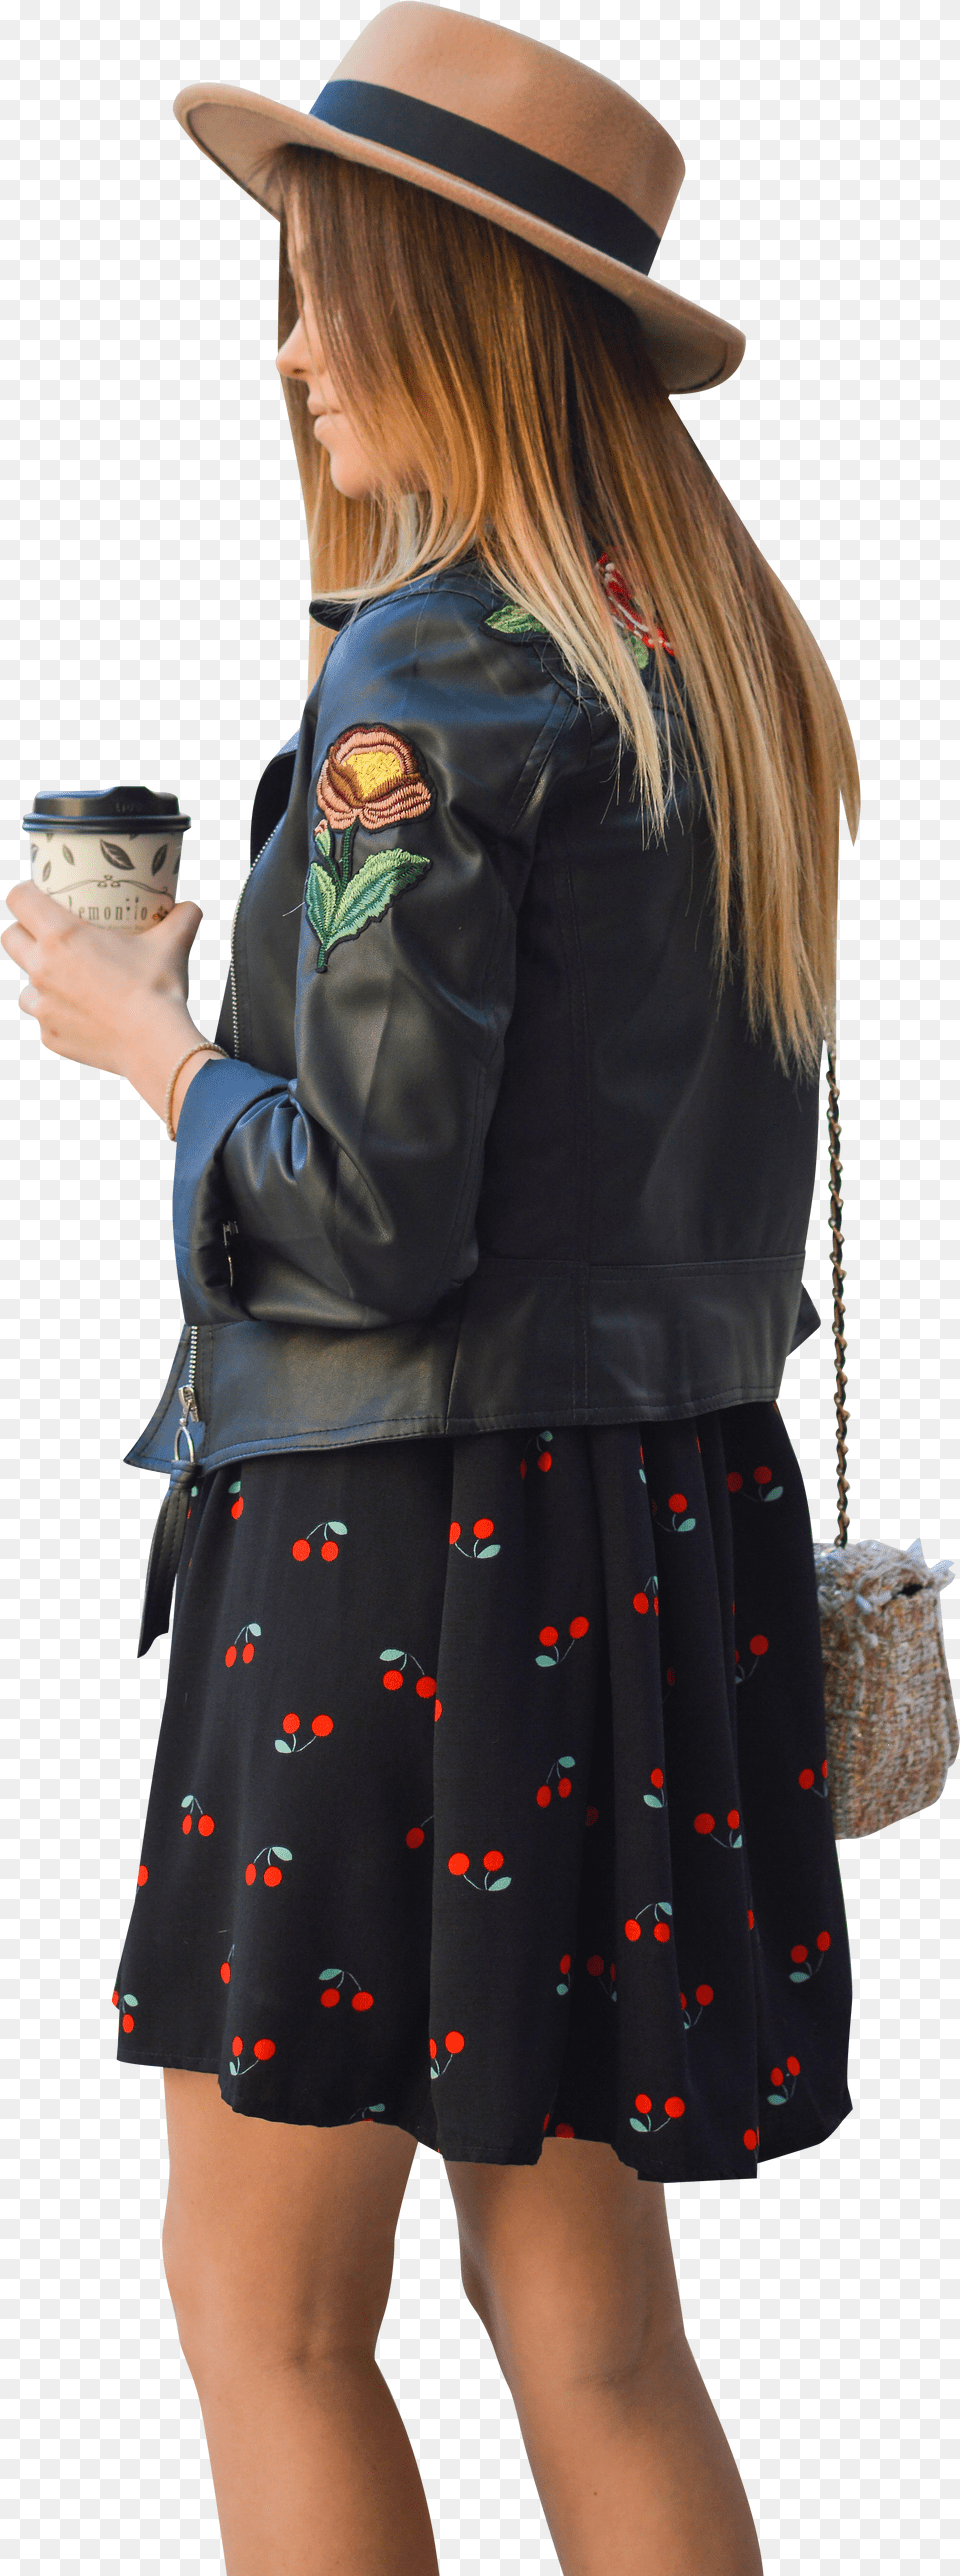 Woman Wearing Floral Black Jacket And Cherry Skirt Floral Dress With Leather Jacket Free Transparent Png